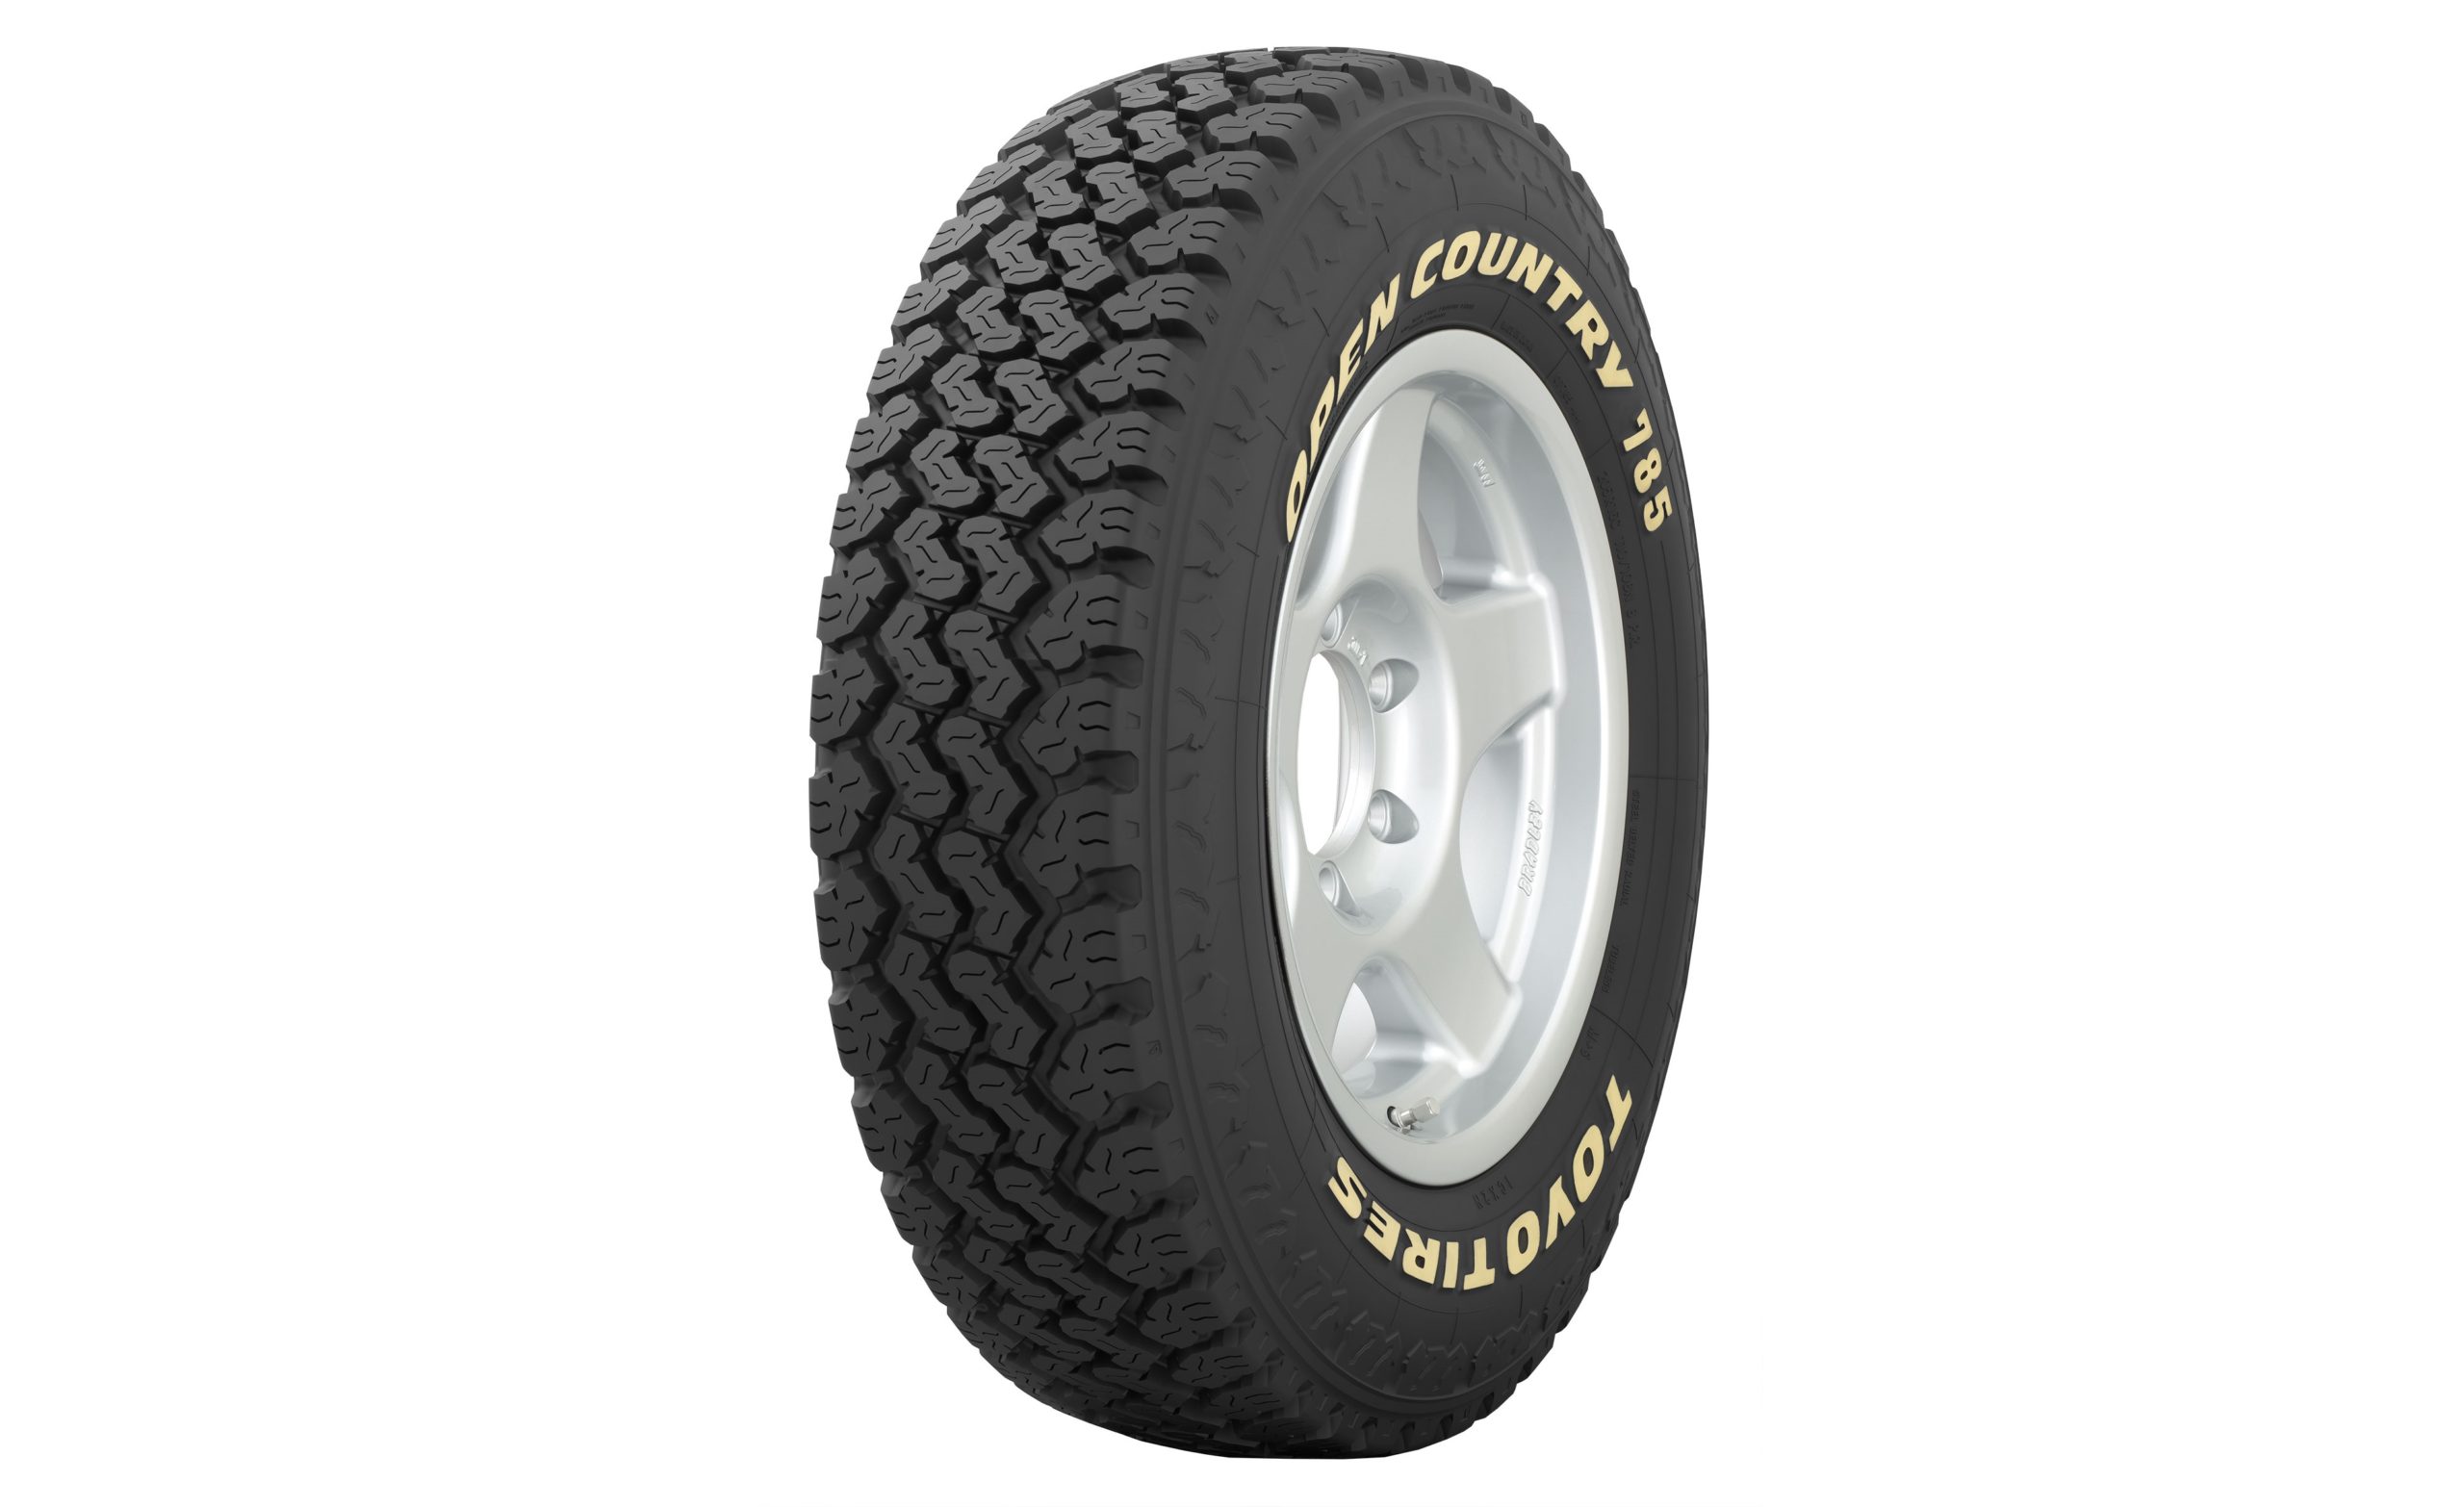 TOYO TIRE、OPEN COUNTRY を復刻発売   ゴム報知新聞ＮＥＸＴ